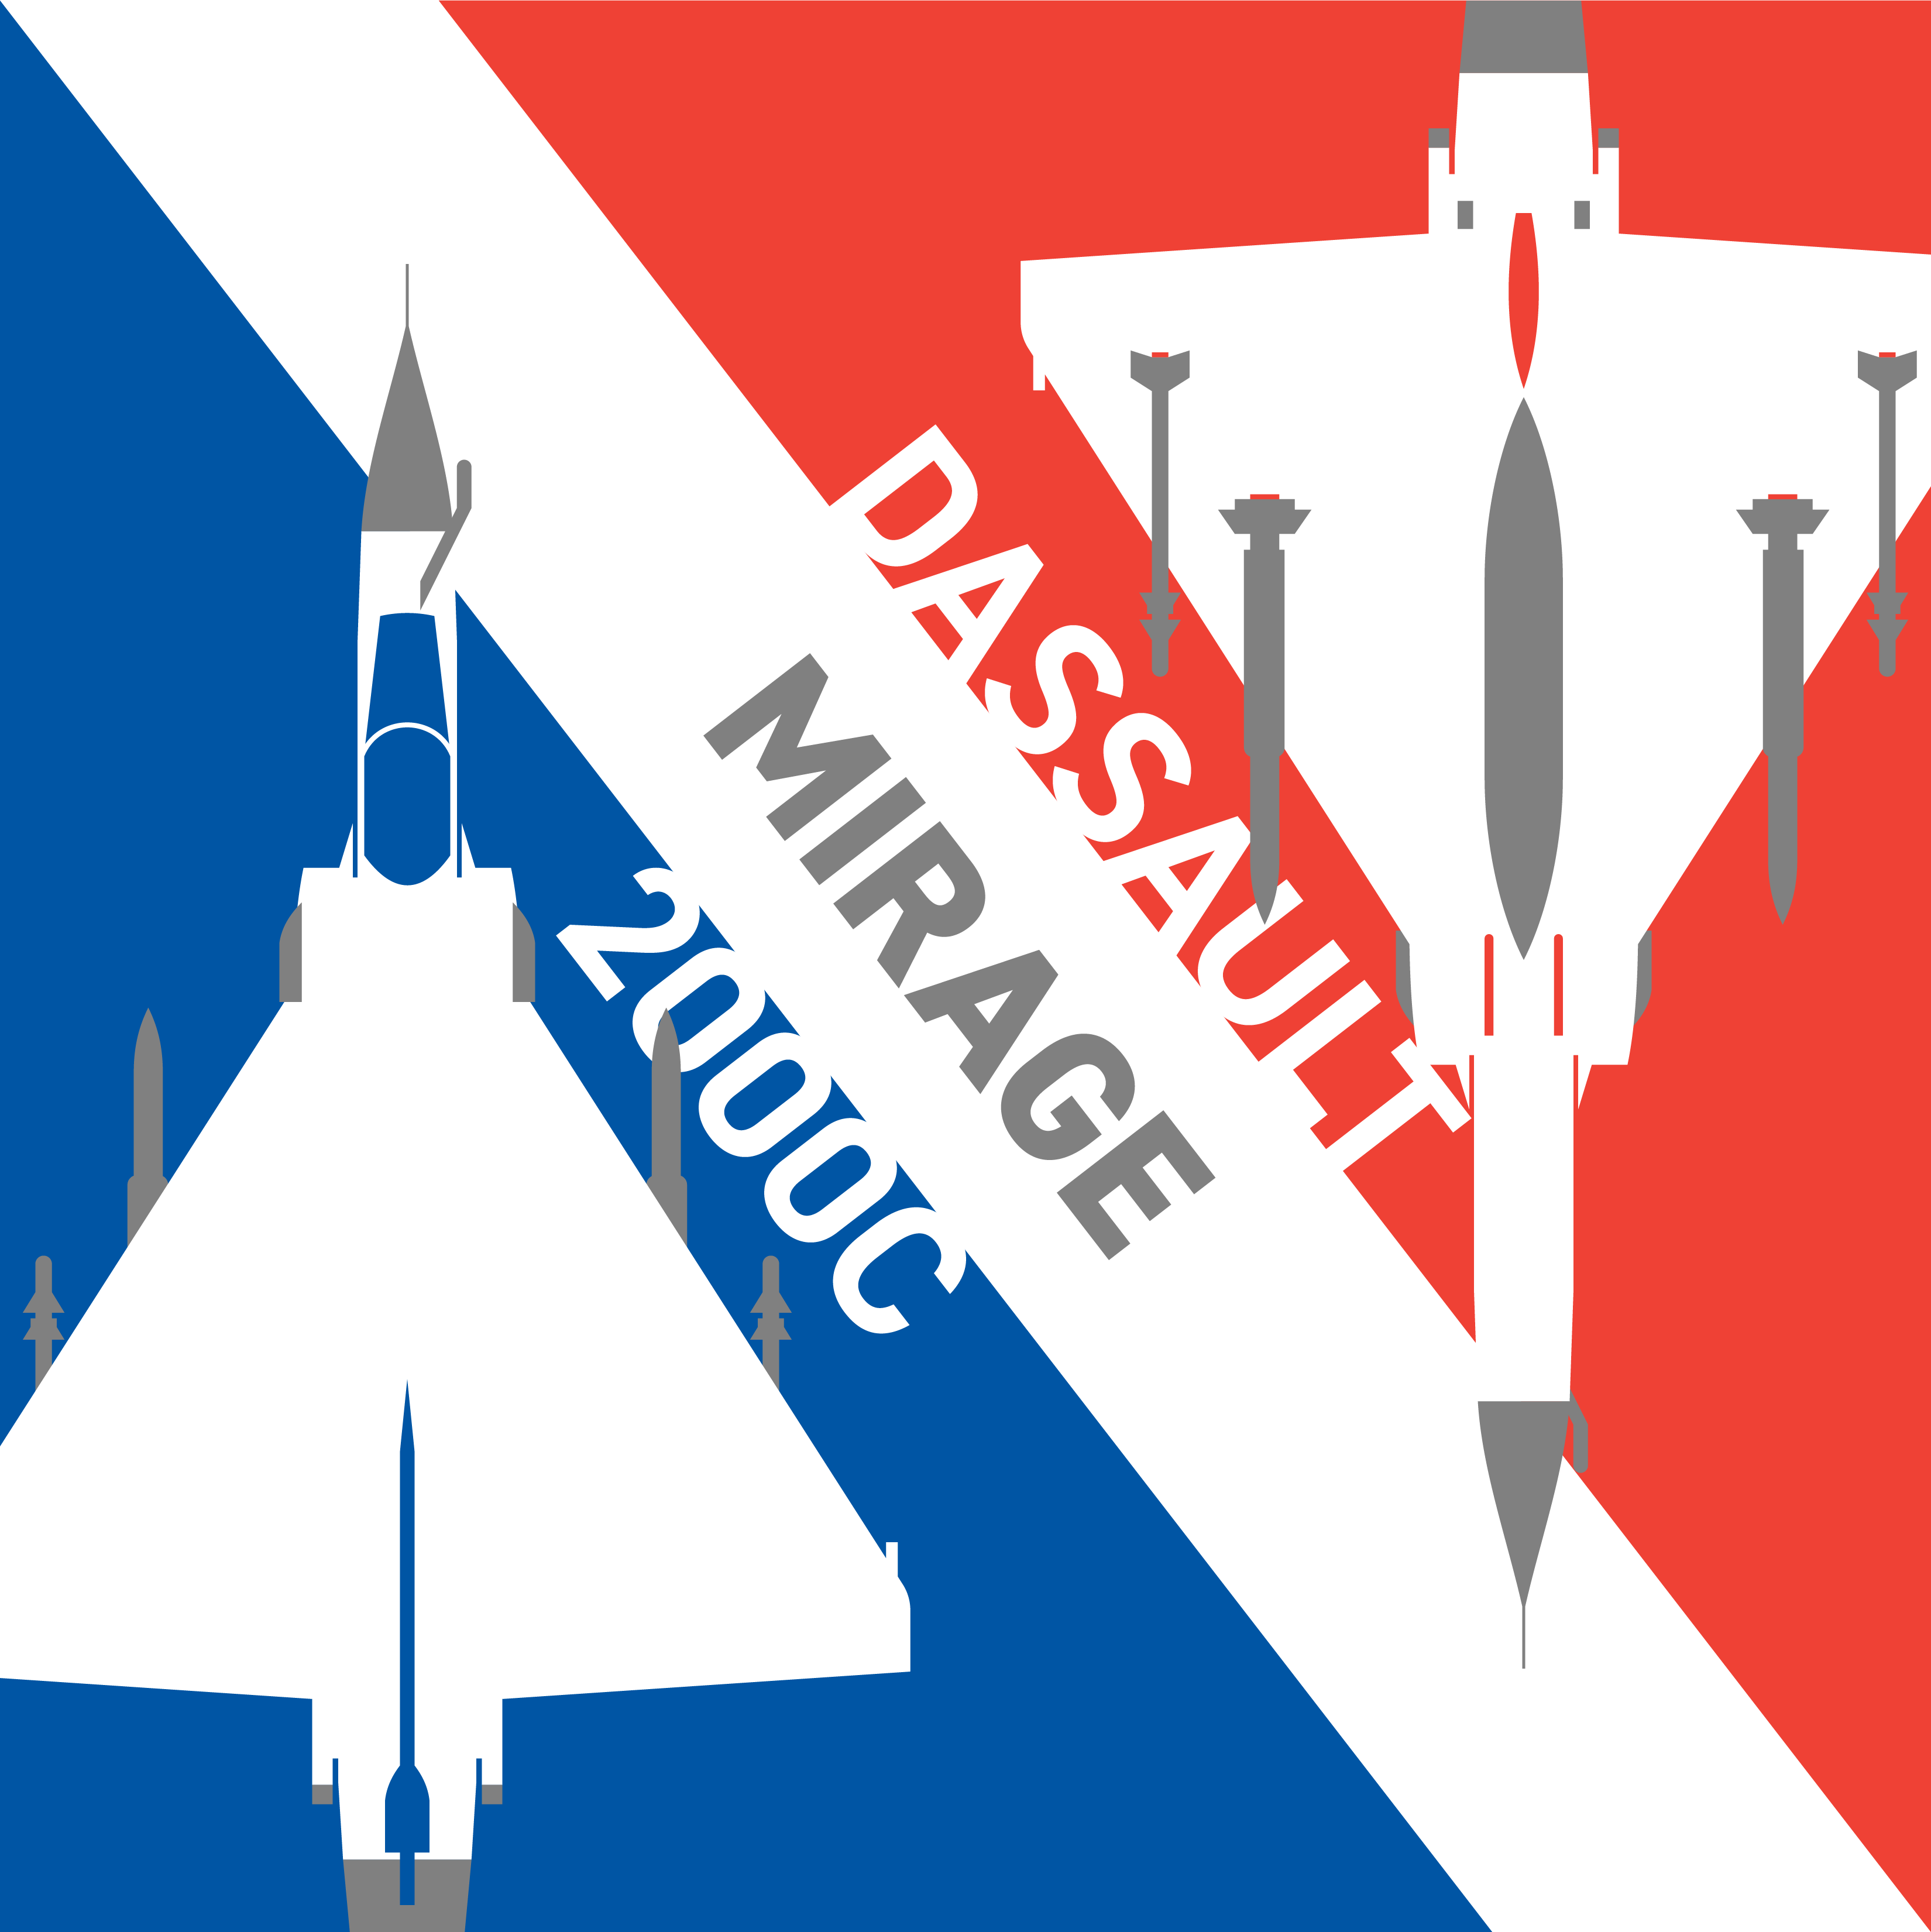 poster for the mirage2000c french fighter jet